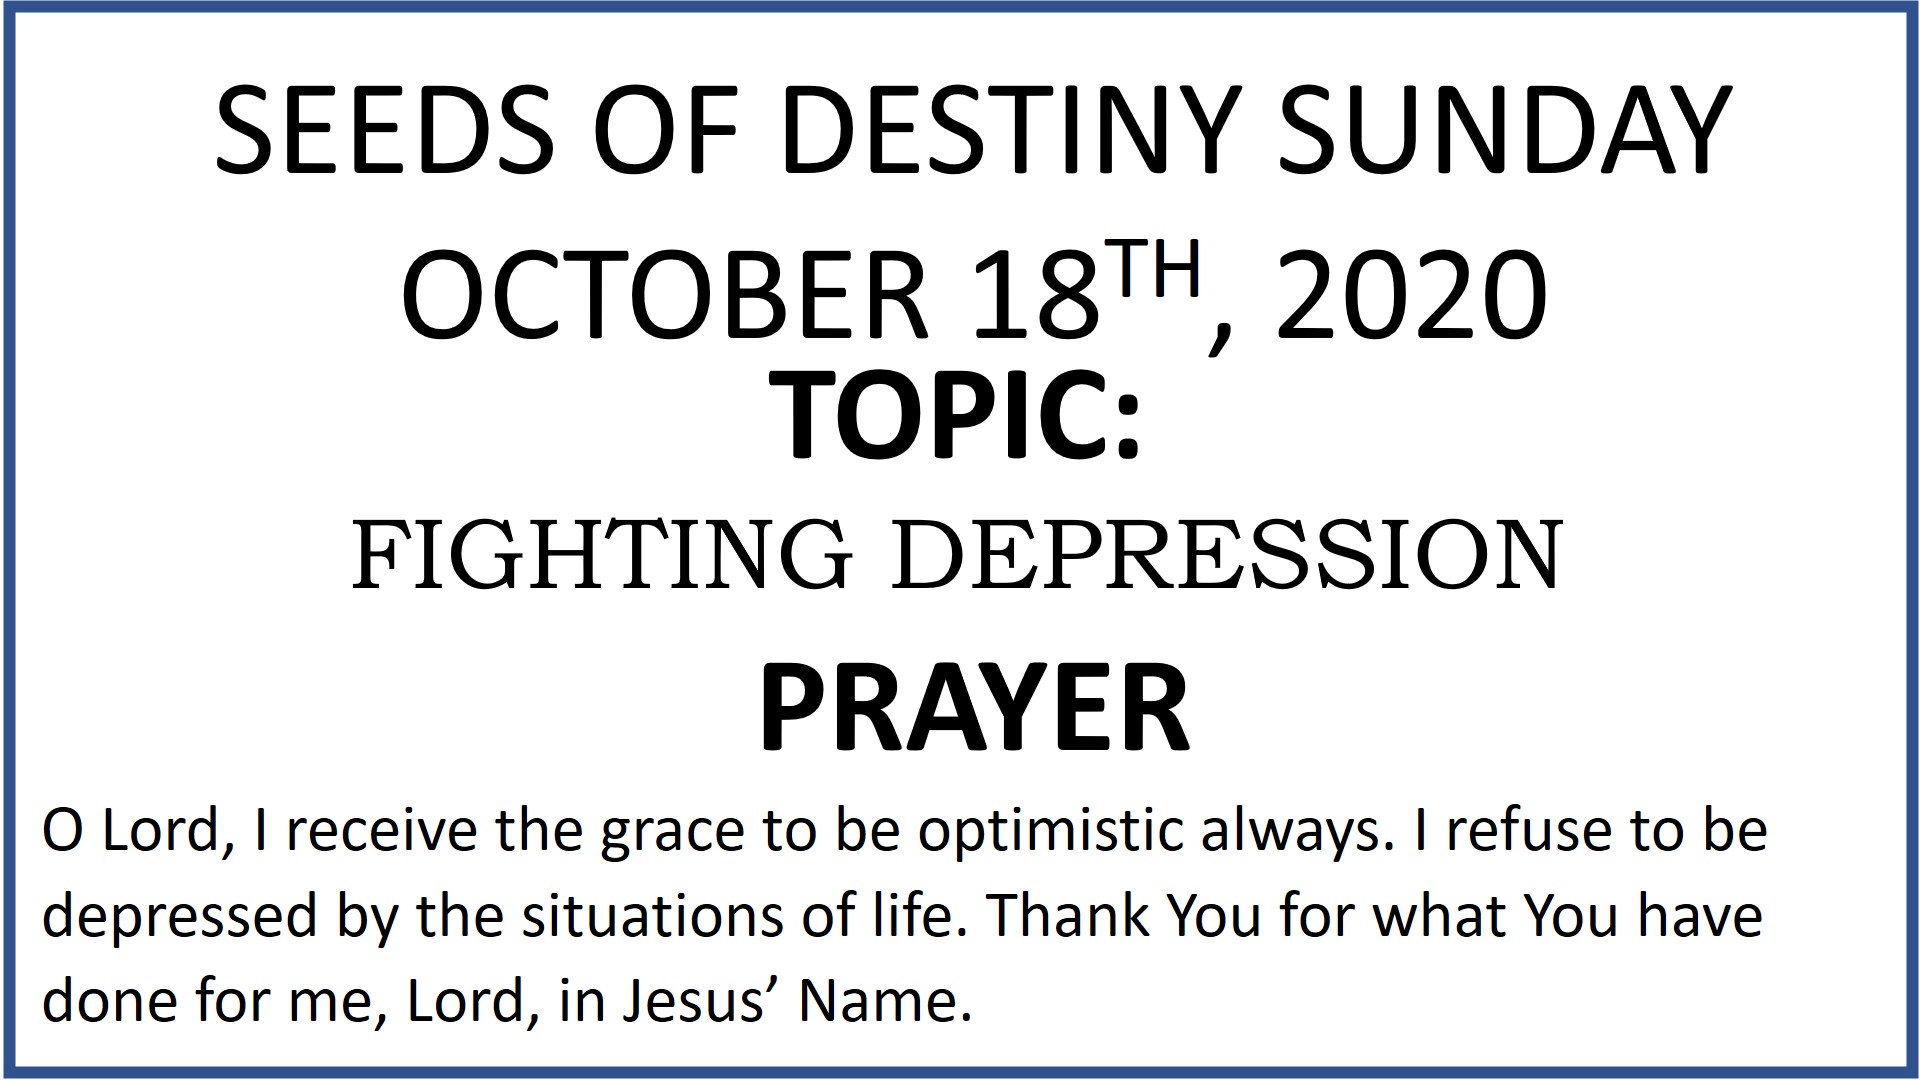 Seeds of Destiny Sunday 18th October 2020 by Dr Paul Enenche